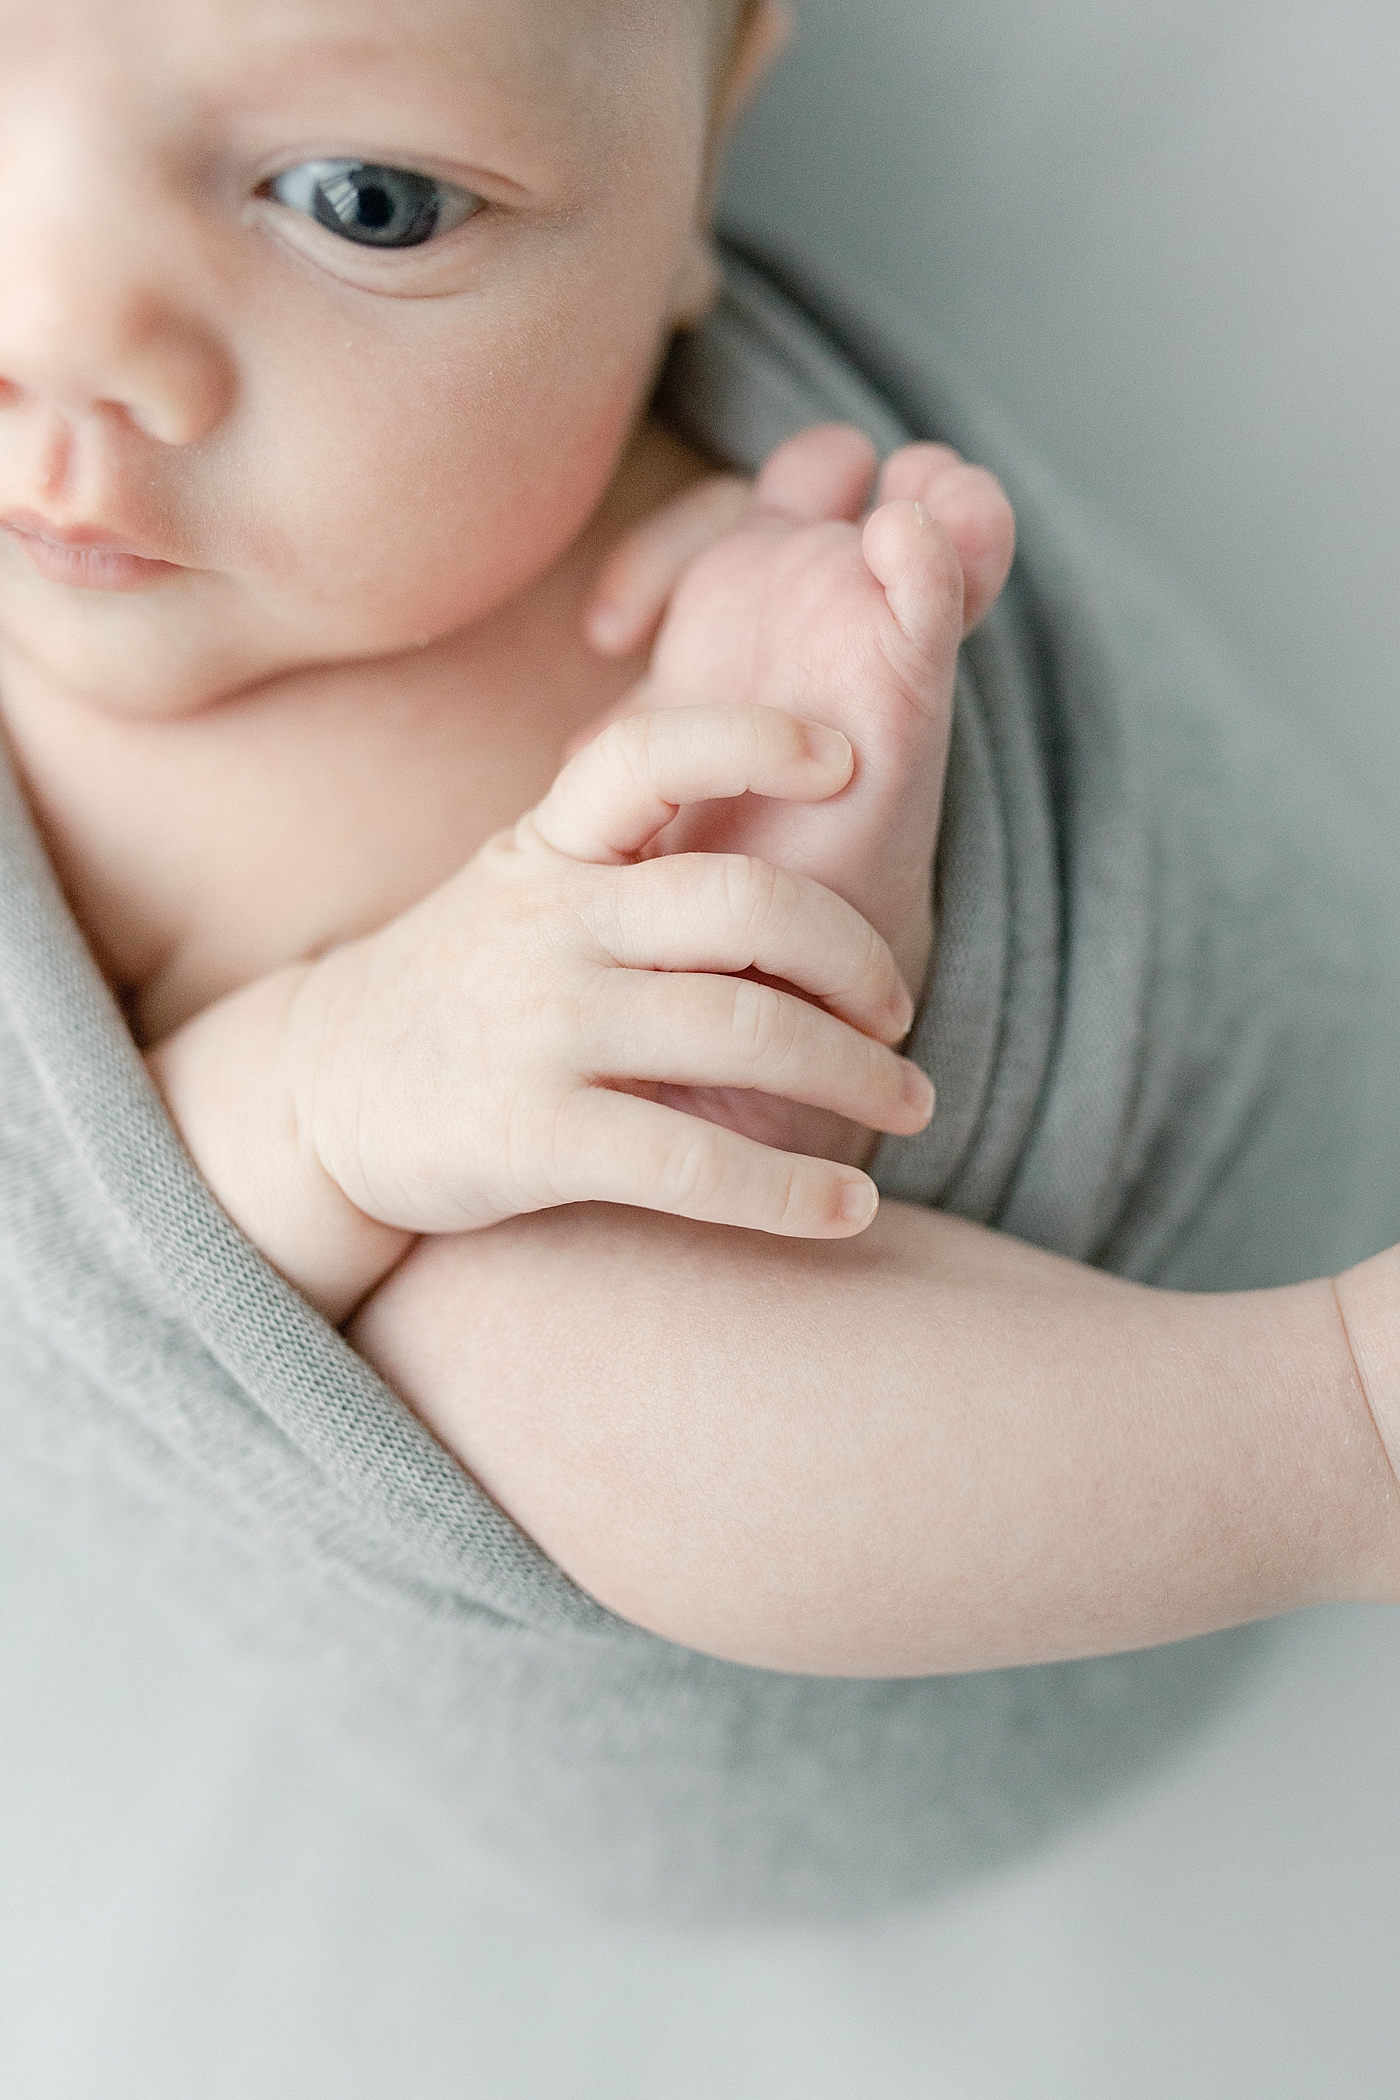 Baby wrapped in gray swaddle details of hands and feet | Photo by Little Sunshine Photography 